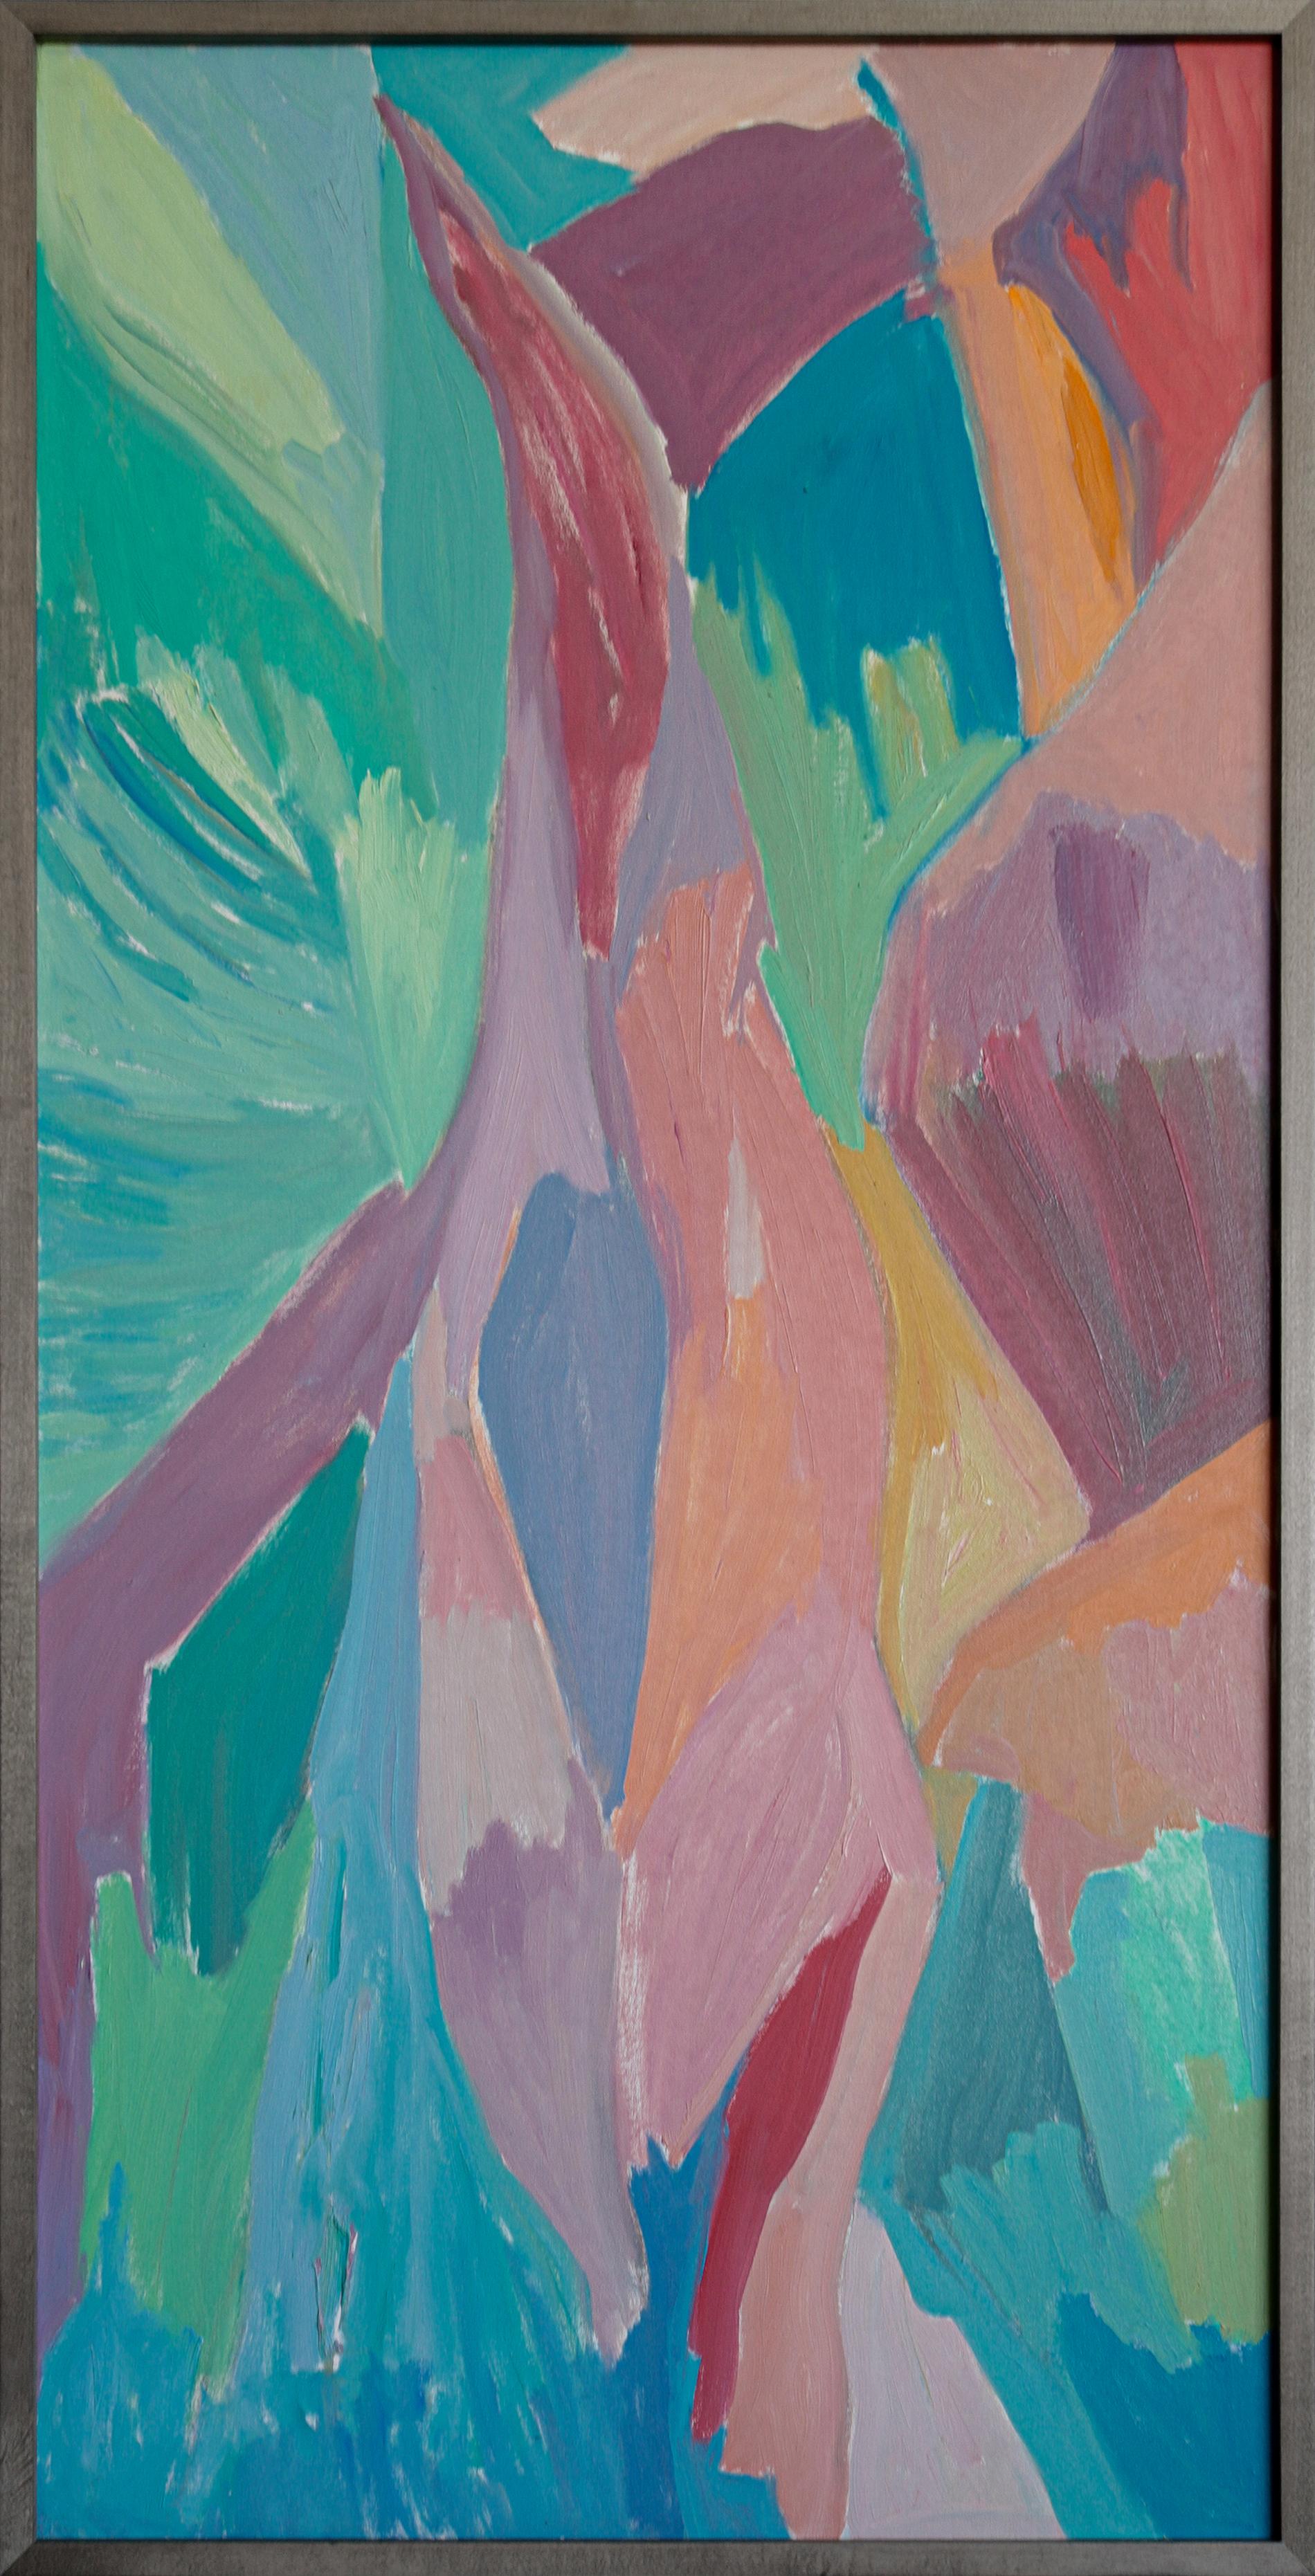   Waterfall, 1970s colorful abstract Oil